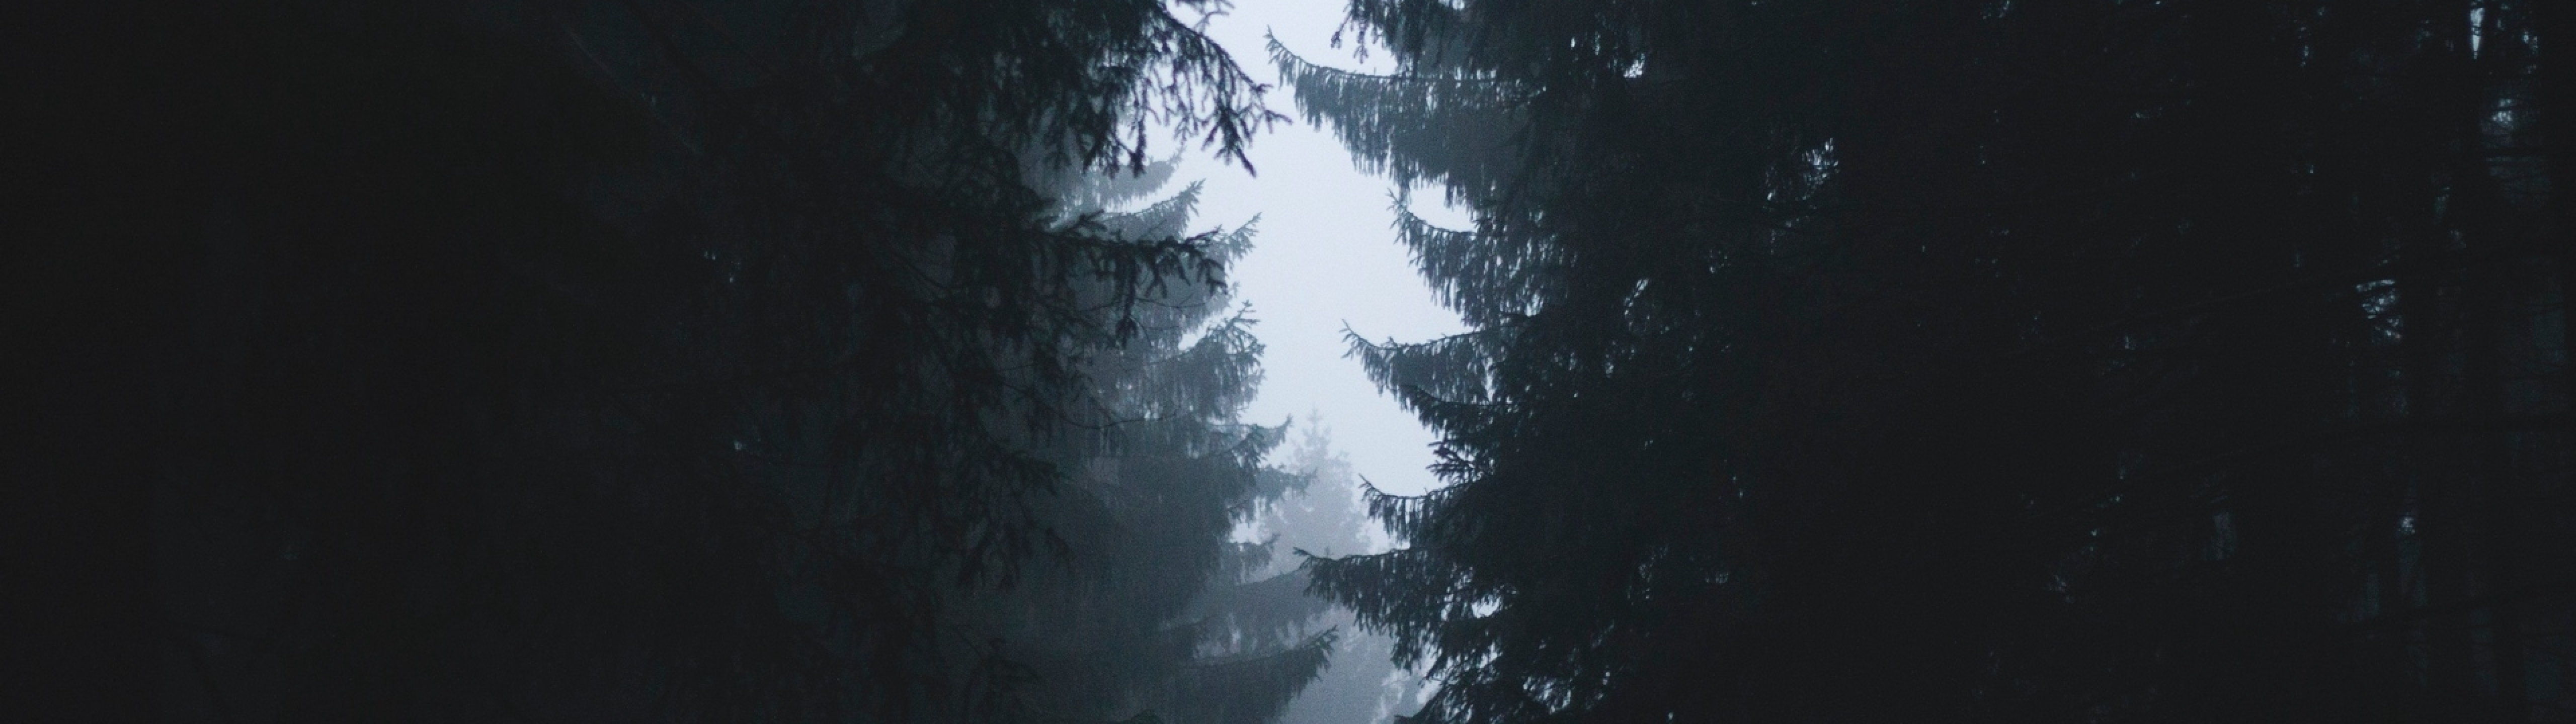 5120x1440 Resolution Misty Forest Photography 2021 5120x1440 Resolution